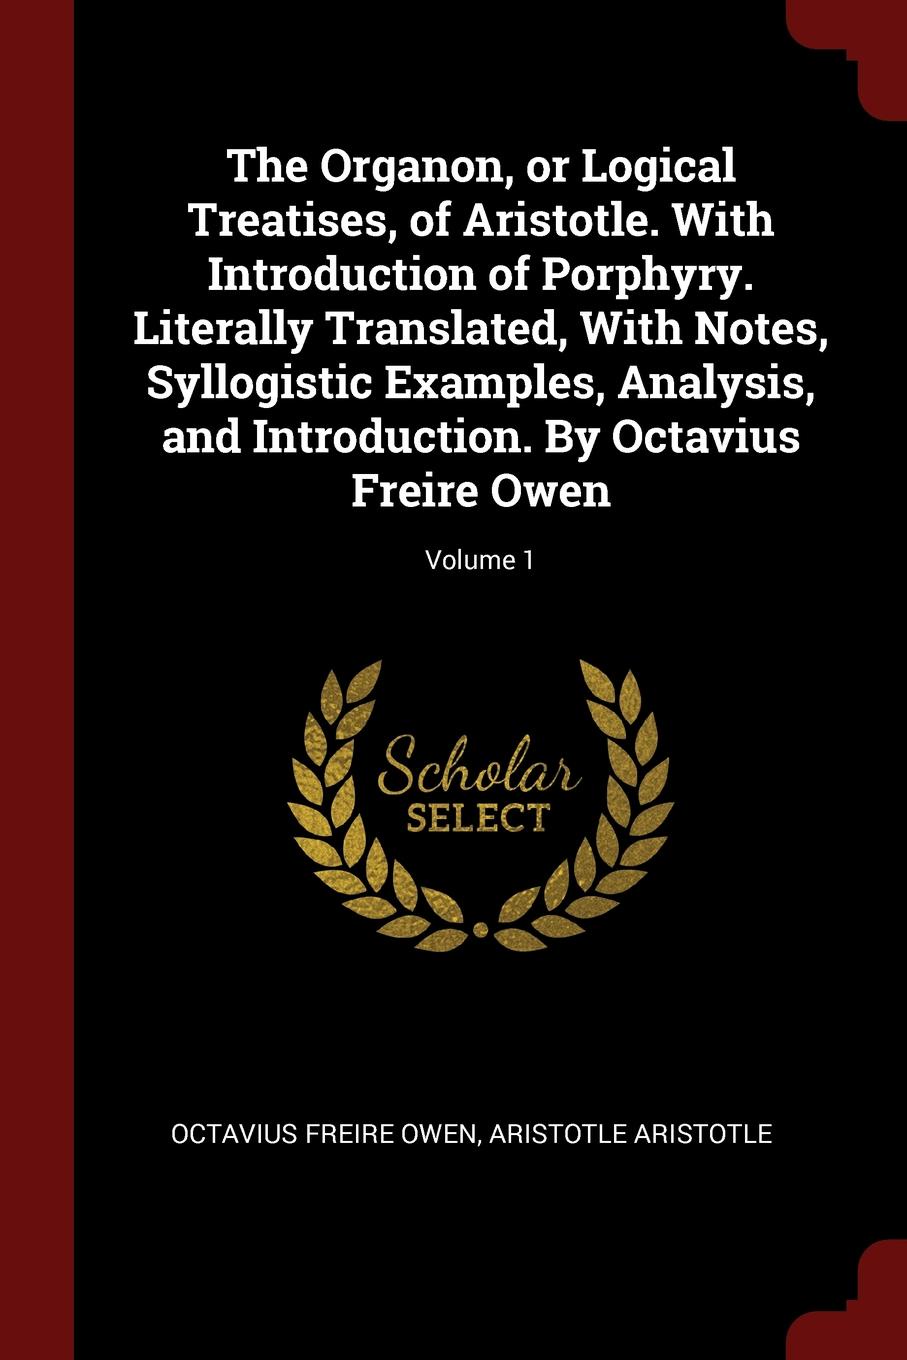 The Organon, or Logical Treatises, of Aristotle. With Introduction of Porphyry. Literally Translated, With Notes, Syllogistic Examples, Analysis, and Introduction. By Octavius Freire Owen; Volume 1